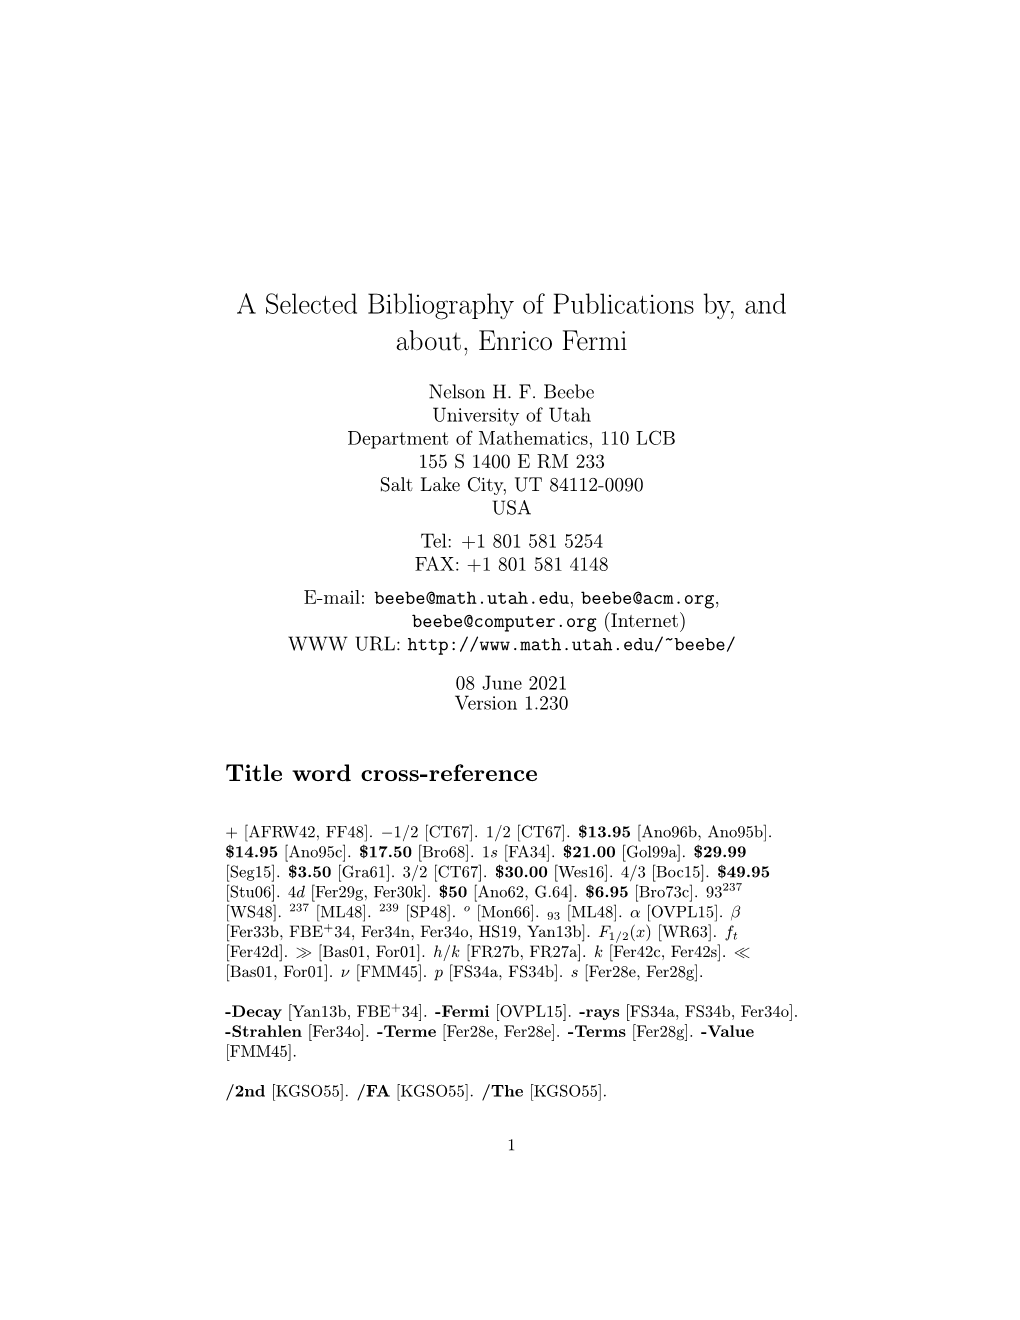 A Selected Bibliography of Publications By, and About, Enrico Fermi